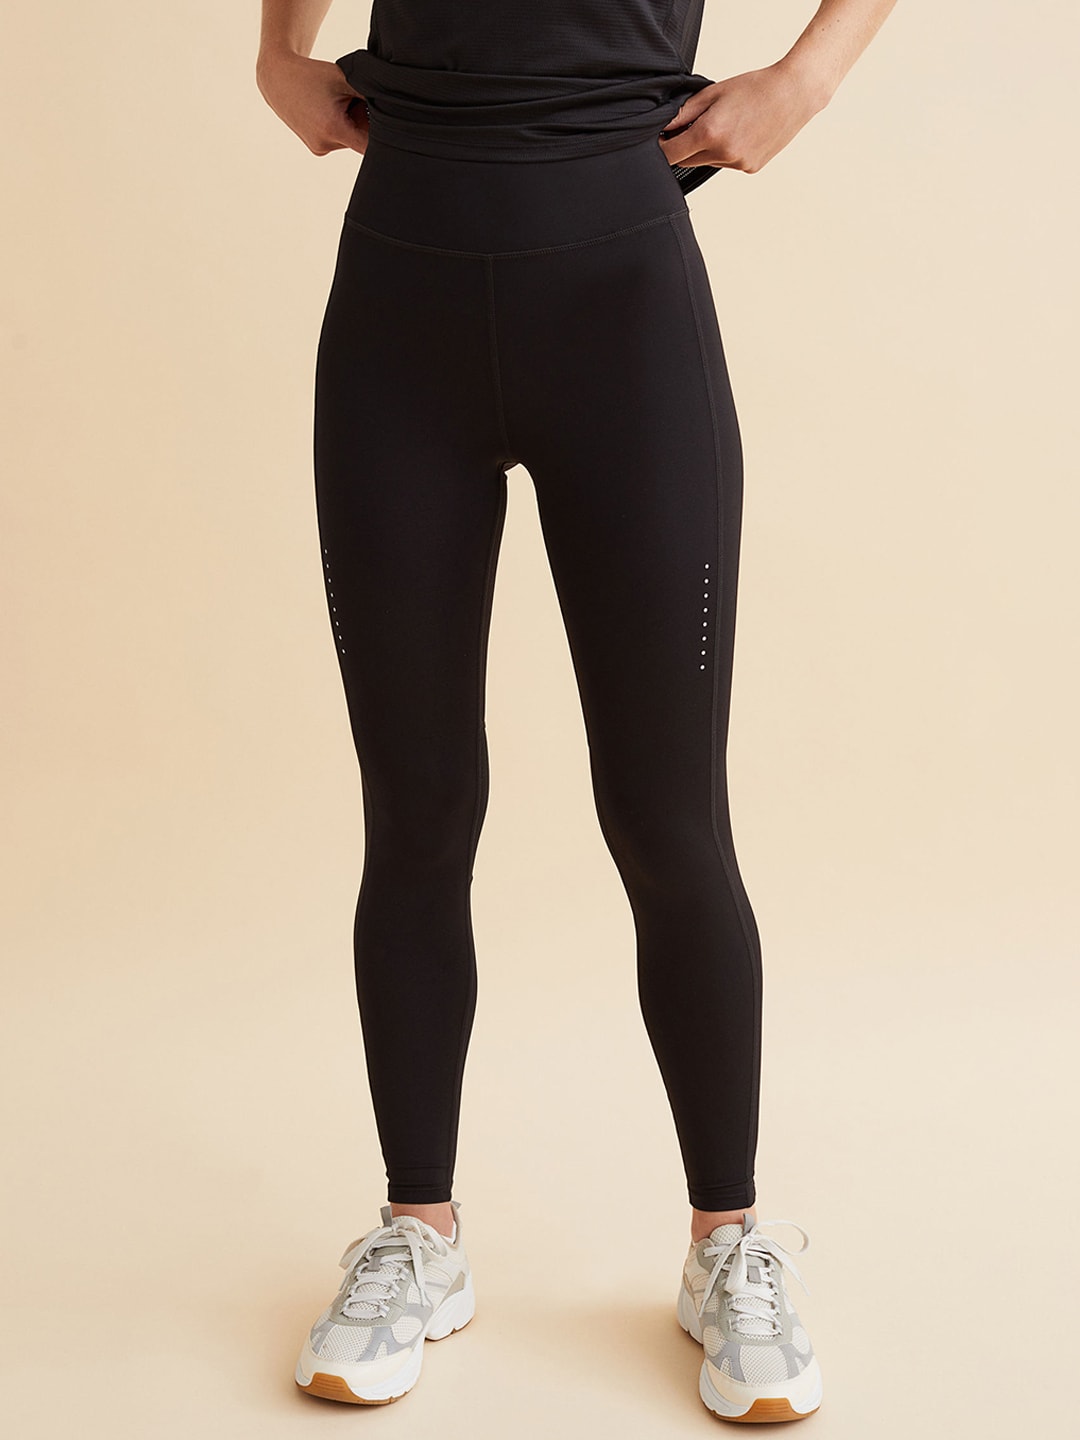 H&M Women Black Solid High Waist Running Tights Price in India